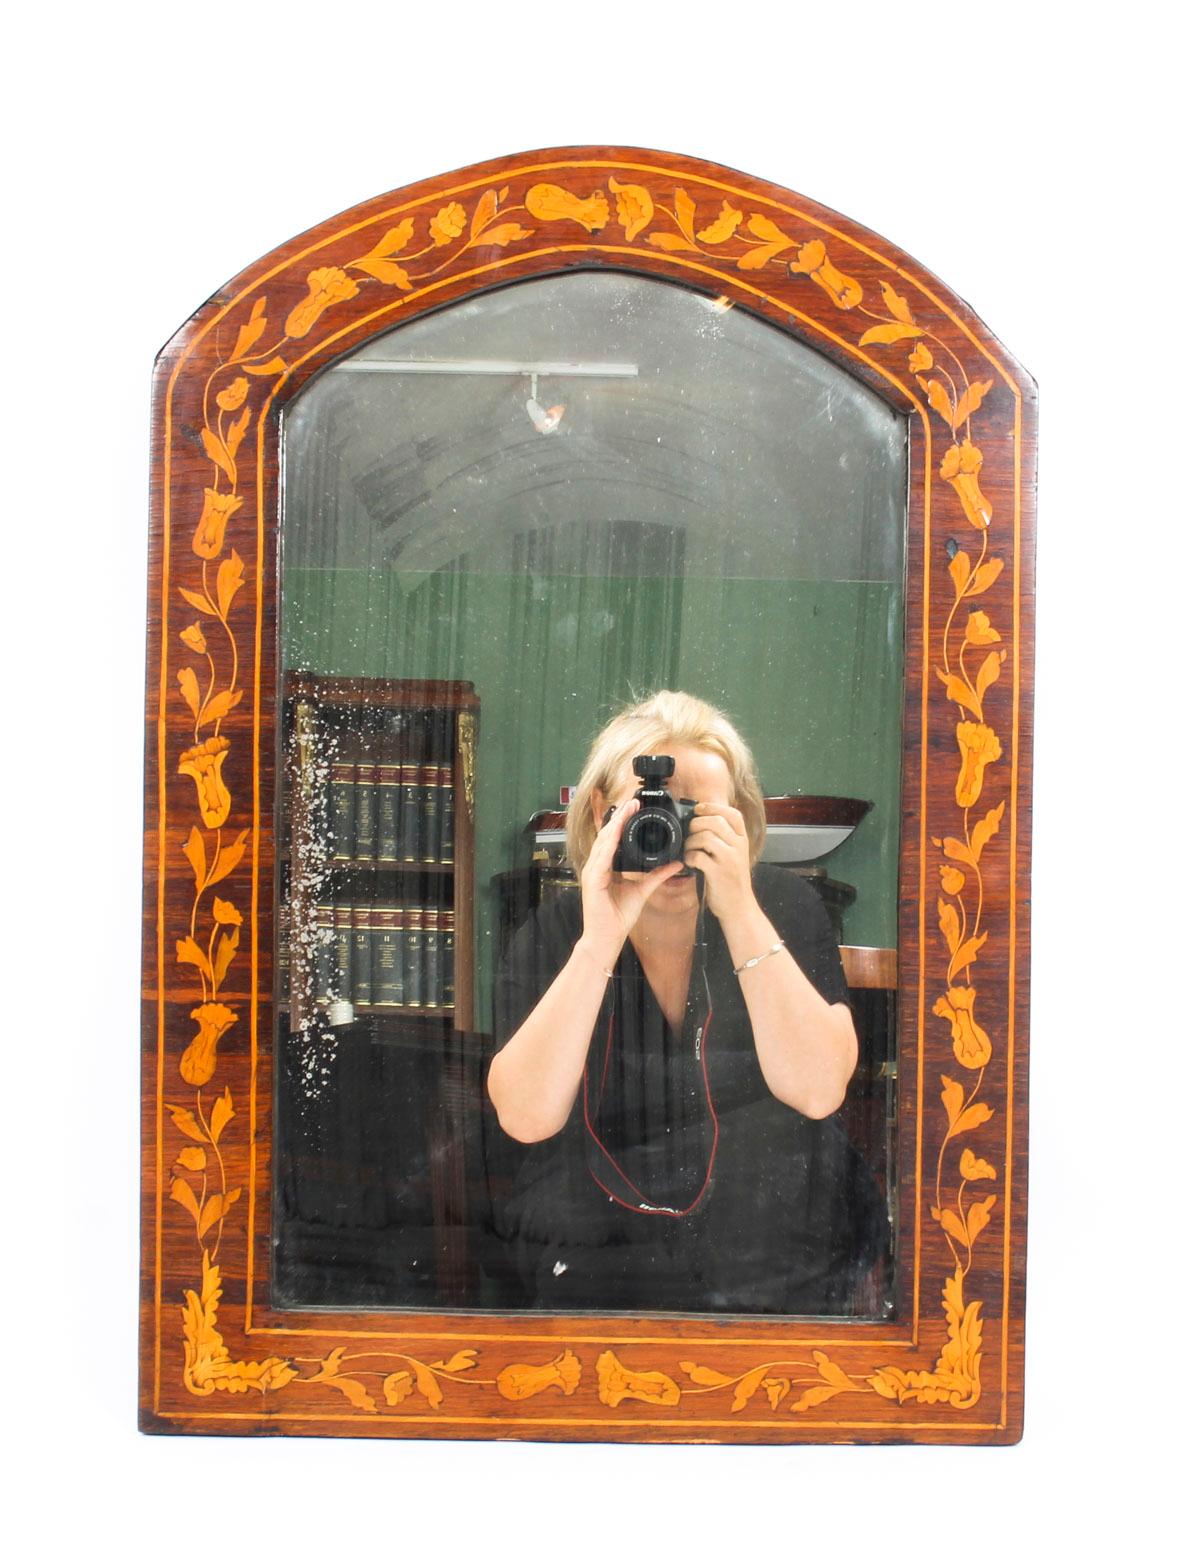 This is a very beautiful antique Dutch flame mahogany and marquetry arched top wall mirror, circa 1830 in date.

The mahogany frame is beautifully inlaid with a continuous marquetry border of trailing flowers and foliage bordered with lines and